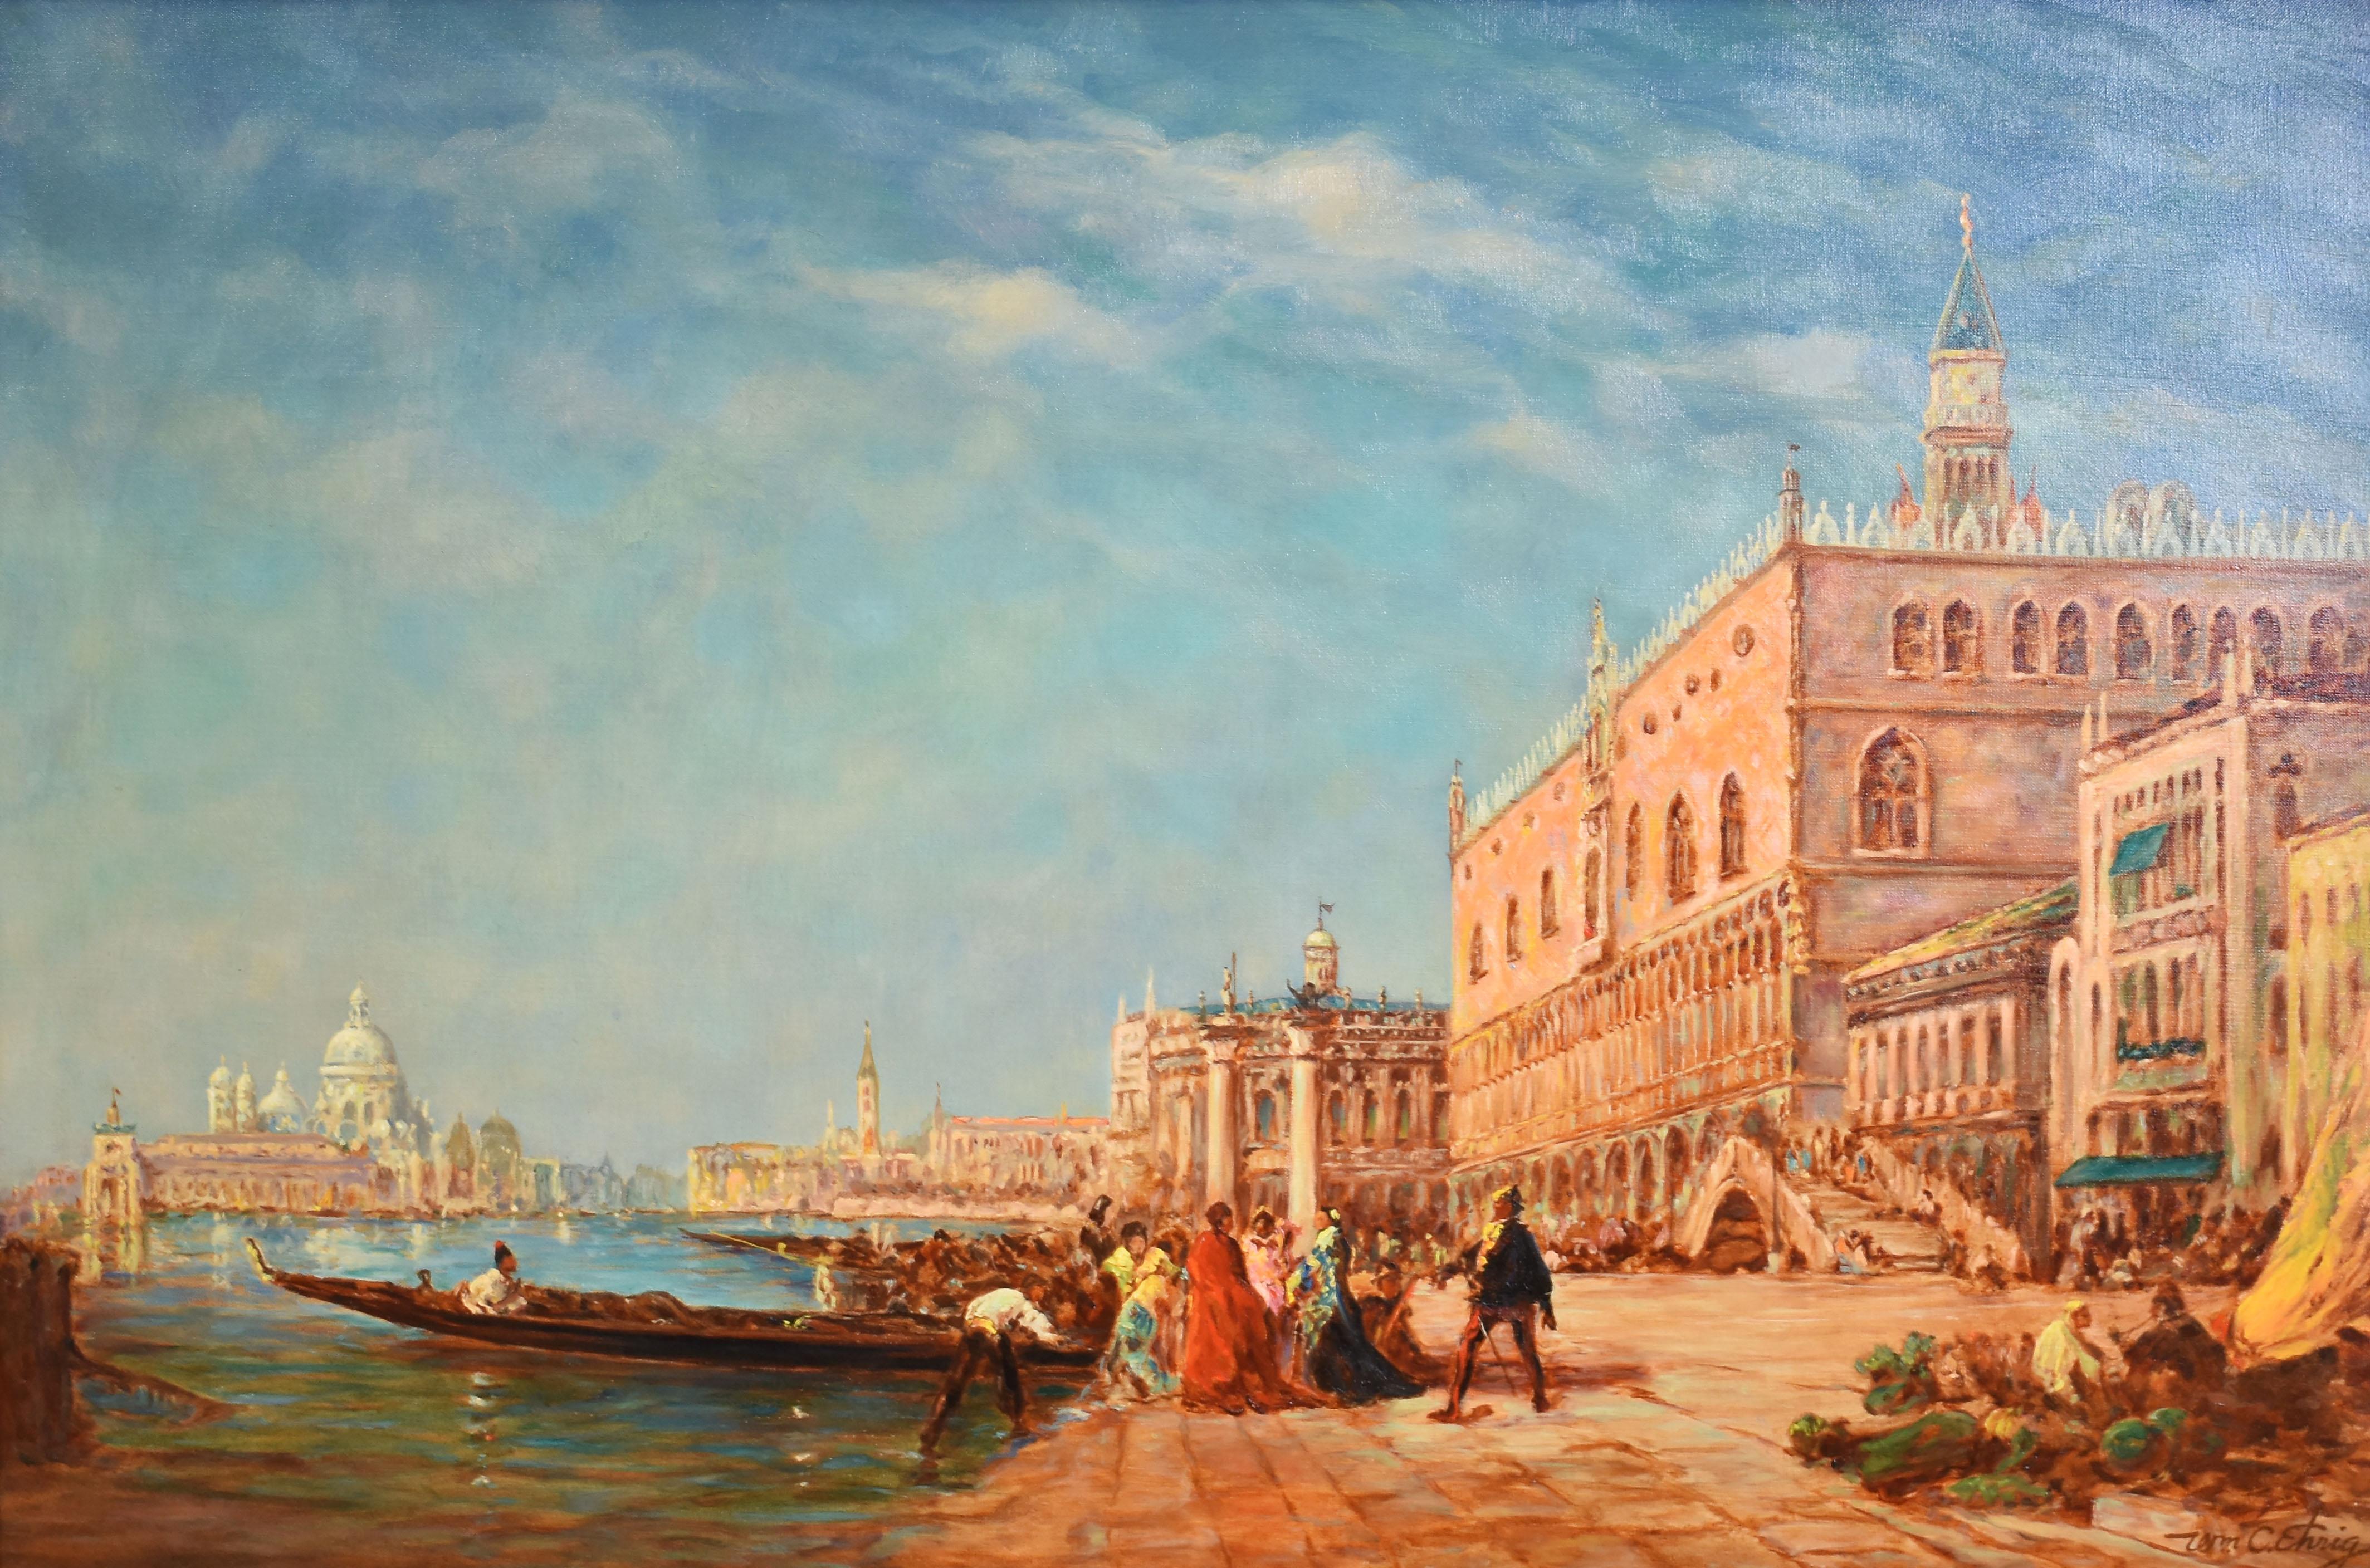 Antique American impressionist oil painting of Venice, Italy by William Columbus Ehrig  (1892 - 1969.  Oil on canvas, circa 1920.  Signed.  Displayed in a period giltwood frame.  Image size, 40